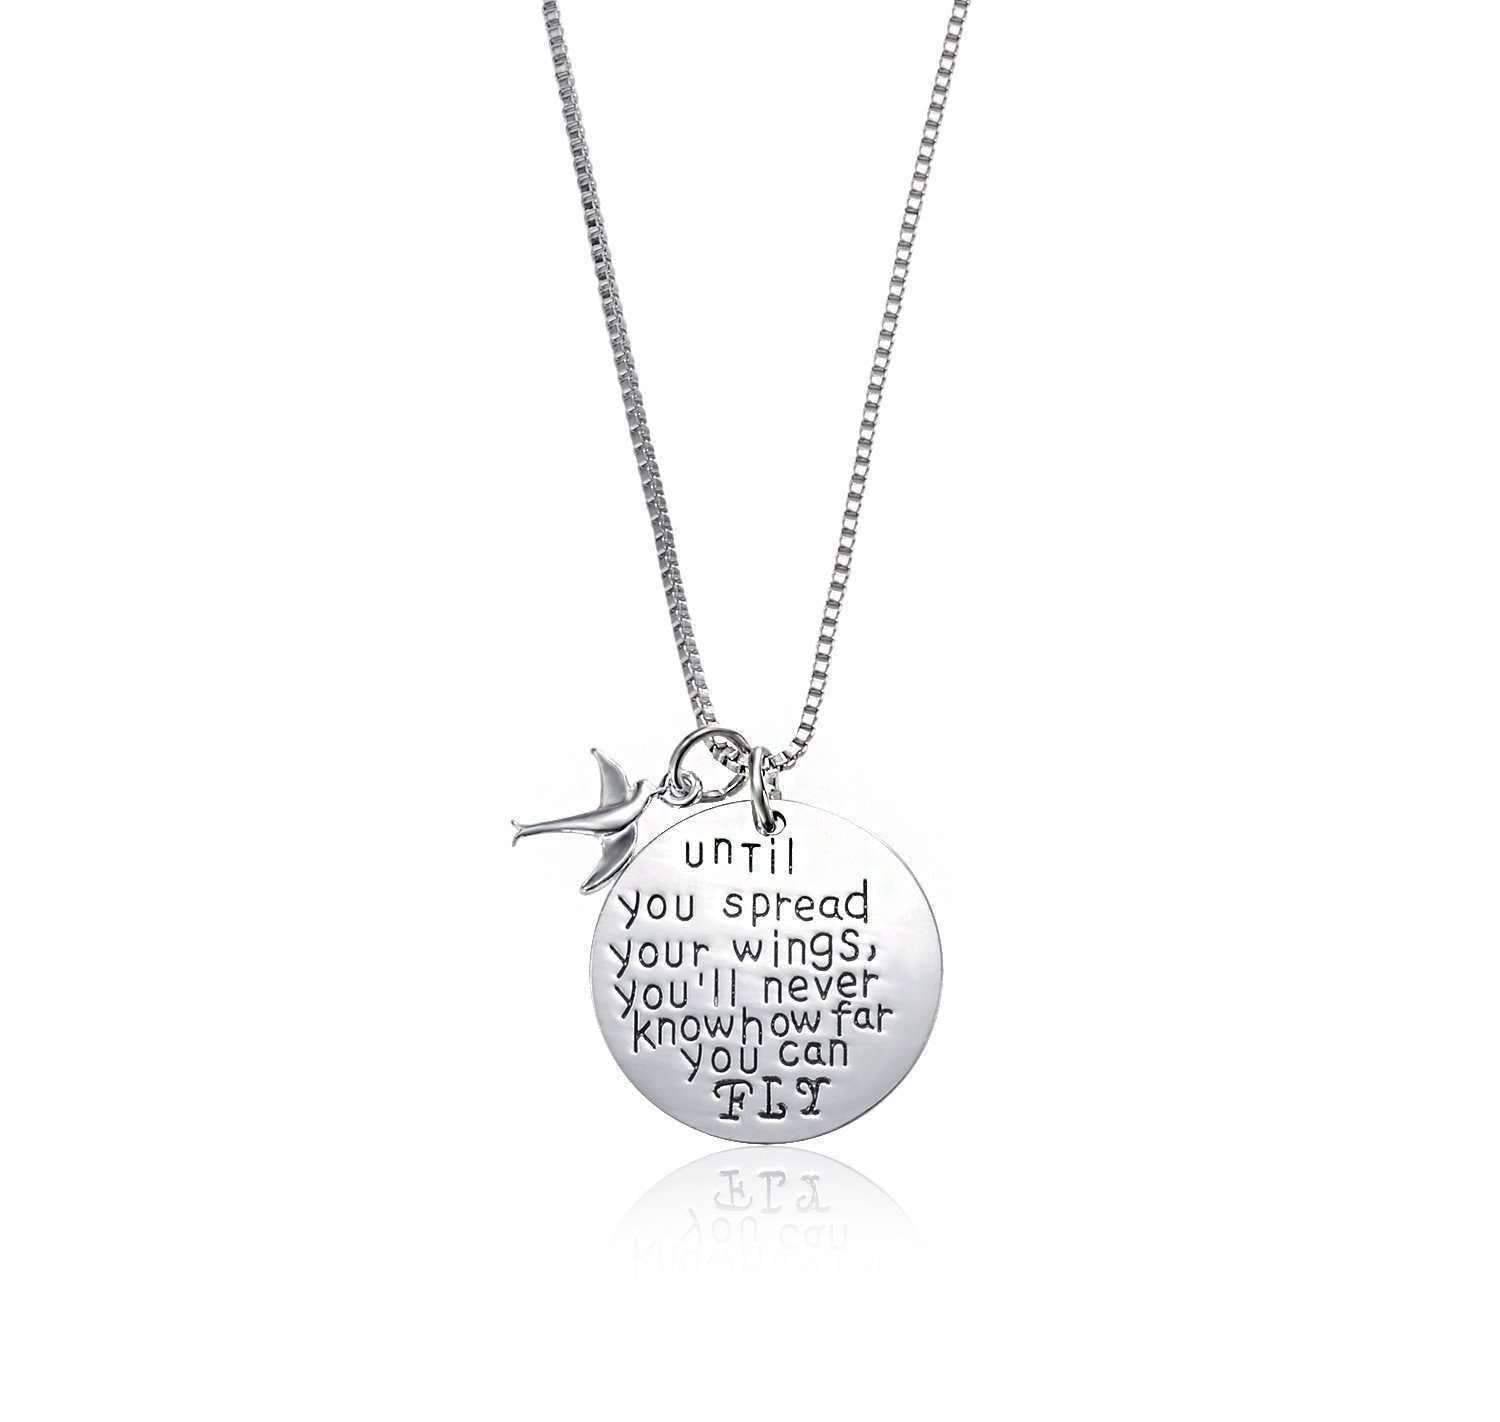 Feshionn IOBI Necklaces ON SALE - "Until You Spread Your Wings, You'll Never Know How Far You Can FLY" Inspirational Charm Necklace